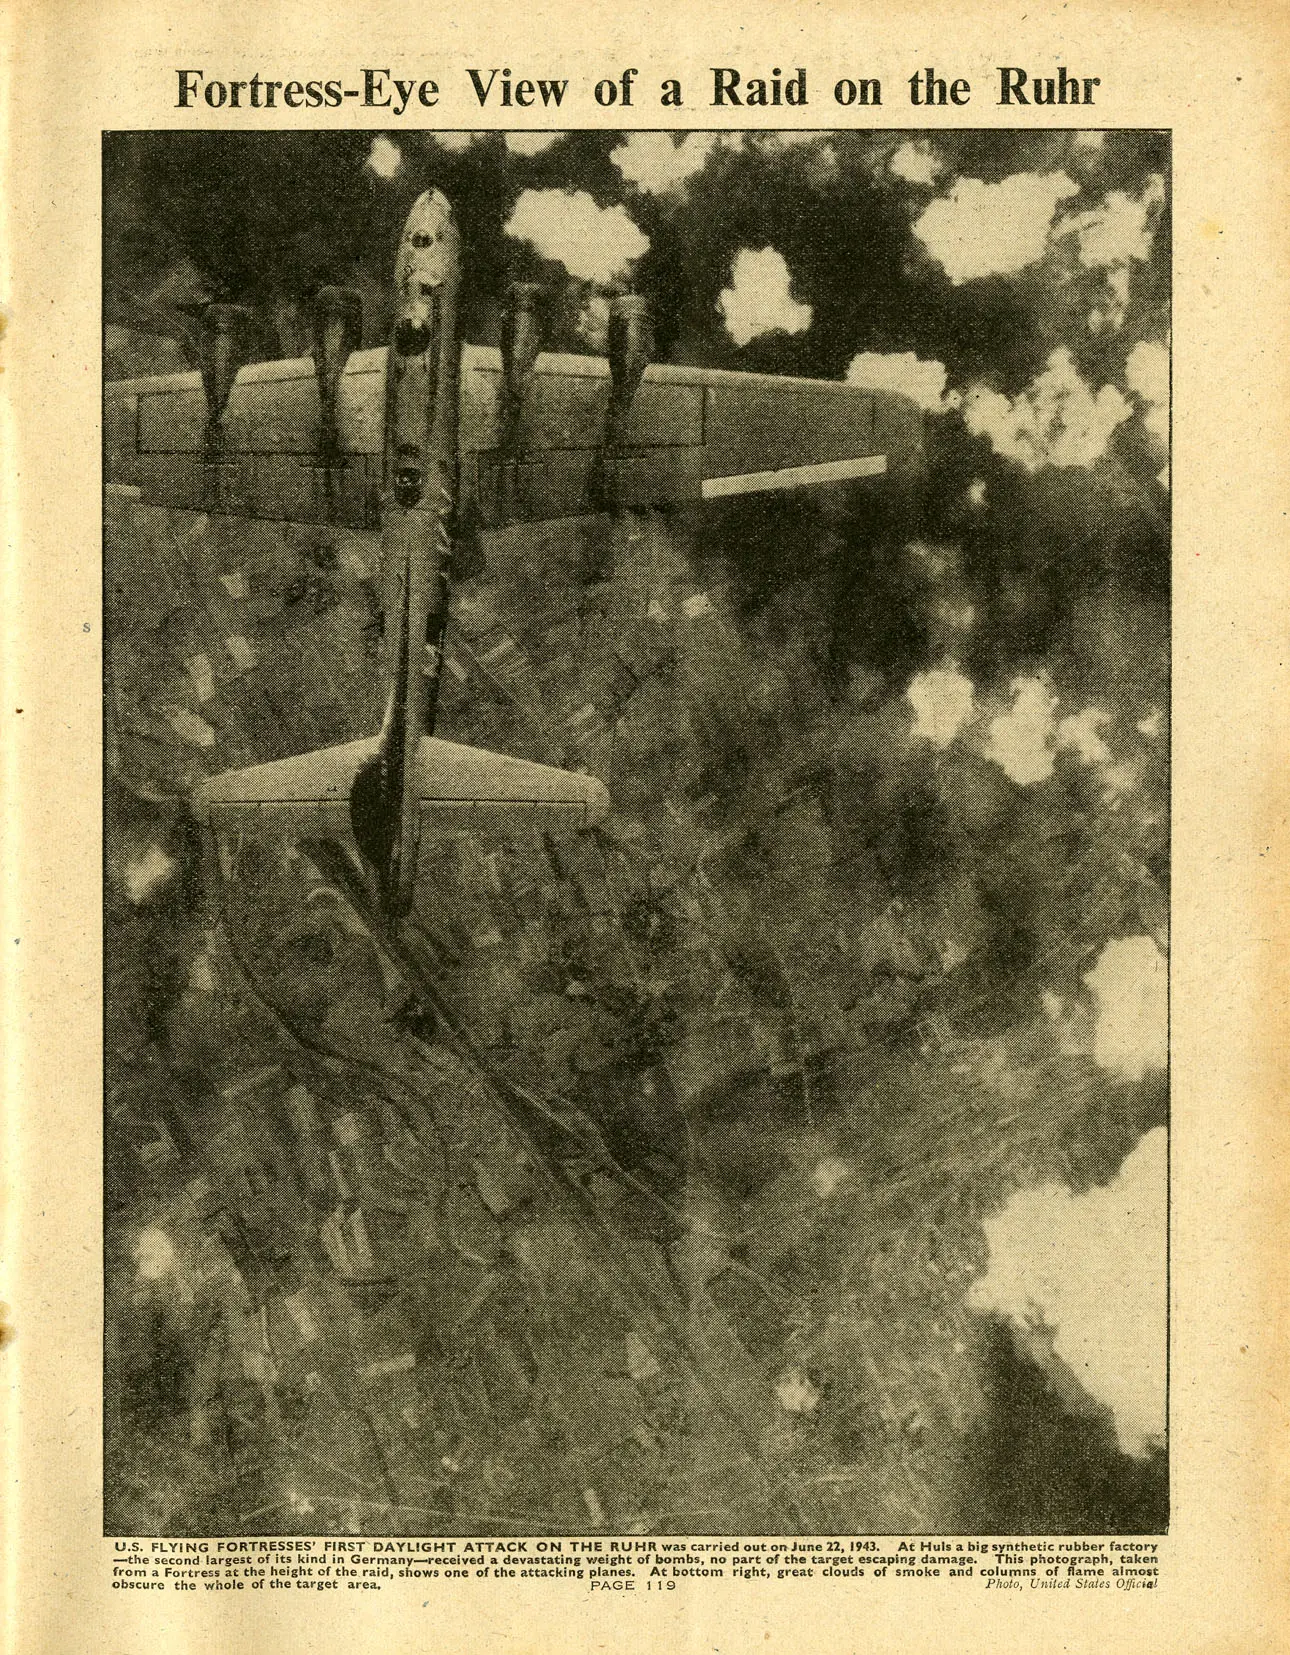 A page of The War Illustrated showing a four engine bomber flying above the clouds.